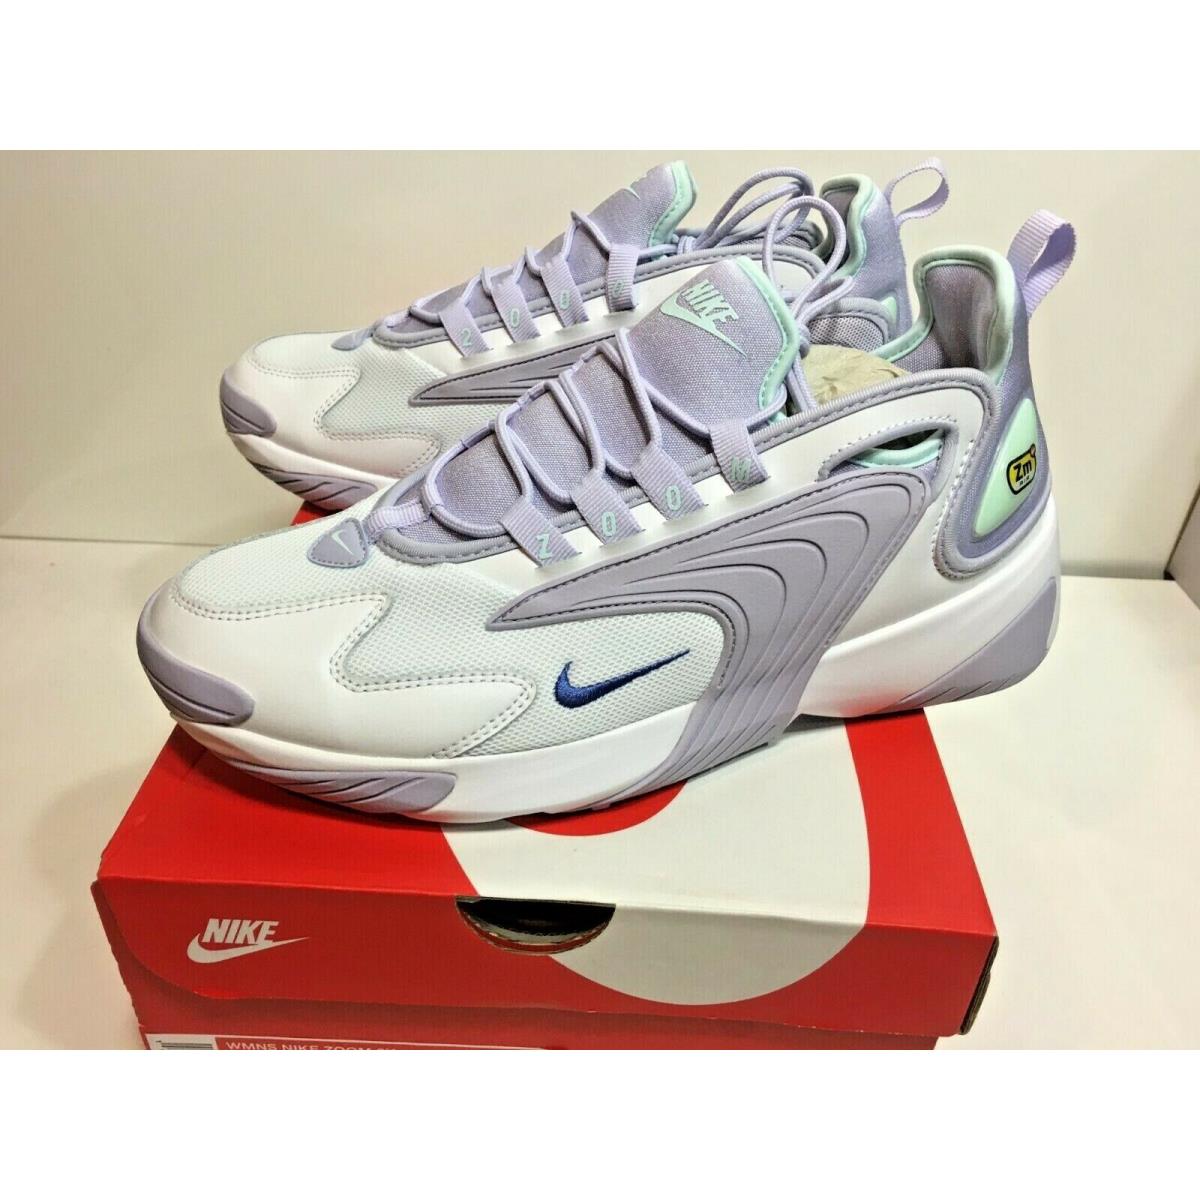 Responder Cuarto agudo Nike Zoom 2k Womens White Purple Teal Sapphire Size 10 Sneakers Shoes  Running | 192499308412 - Nike shoes Zoom - White | SporTipTop